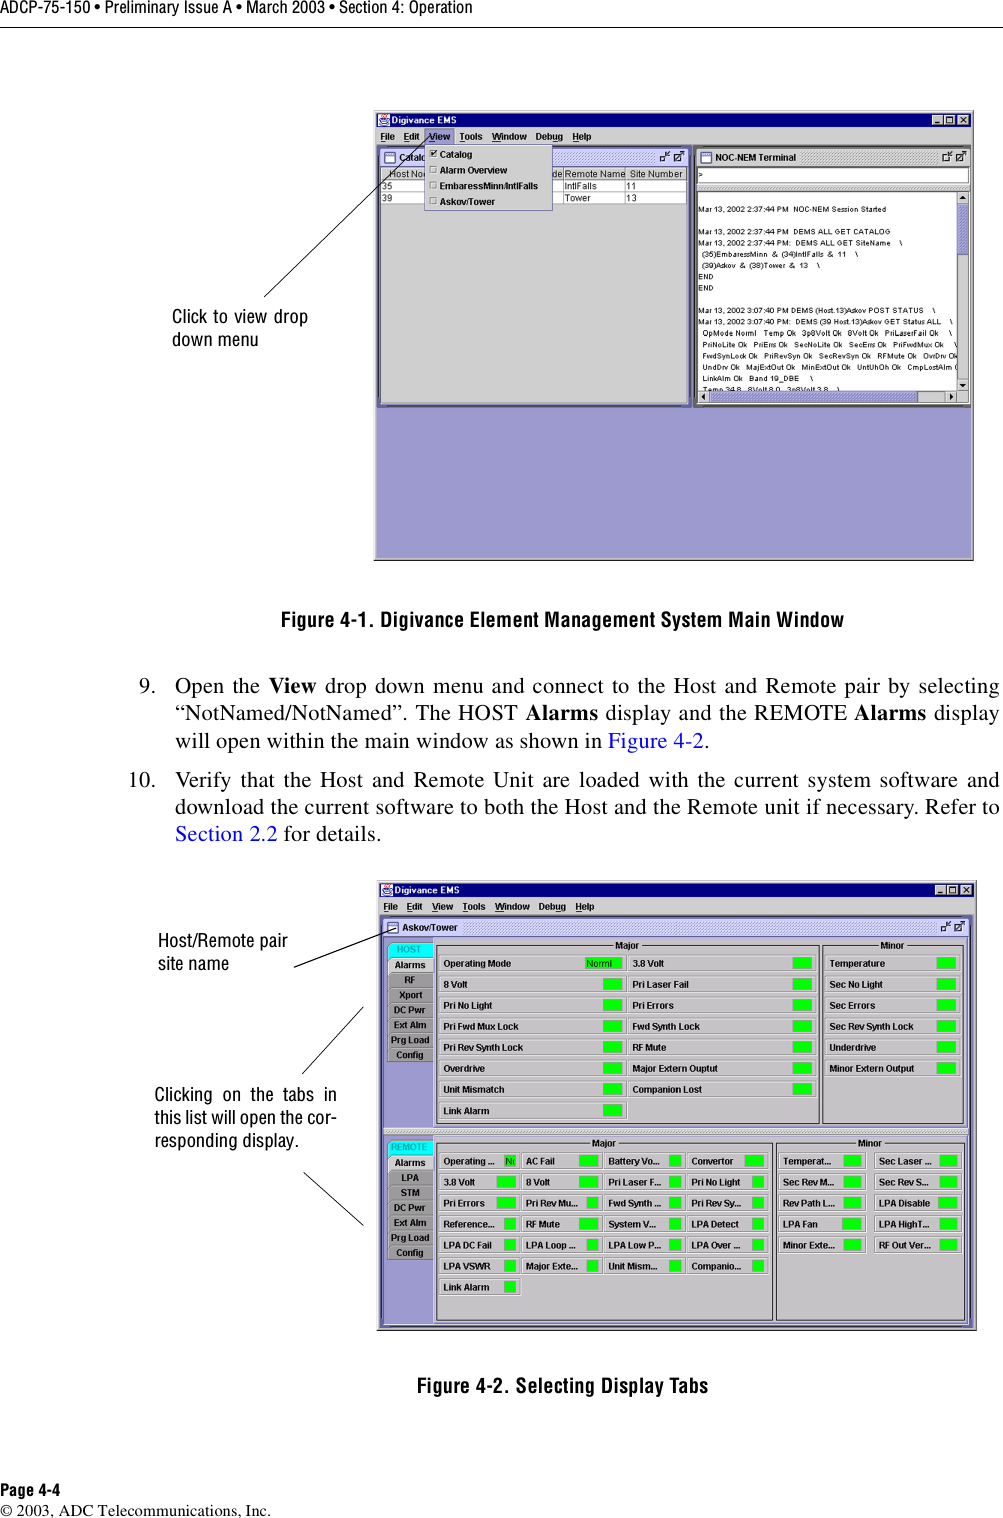 ADCP-75-150 • Preliminary Issue A • March 2003 • Section 4: OperationPage 4-4©2003, ADC Telecommunications, Inc.Figure 4-1. Digivance Element Management System Main Window9. Open the View drop down menu and connect to the Host and Remote pair by selecting“NotNamed/NotNamed”. The HOST Alarms display and the REMOTE Alarms displaywill open within the main window as shown in Figure 4-2.10. Verify that the Host and Remote Unit are loaded with the current system software anddownload the current software to both the Host and the Remote unit if necessary. Refer toSection 2.2 for details.Figure 4-2. Selecting Display TabsClick to view dropdown menuClicking on the tabs inthis list will open the cor-responding display.Host/Remote pairsite name